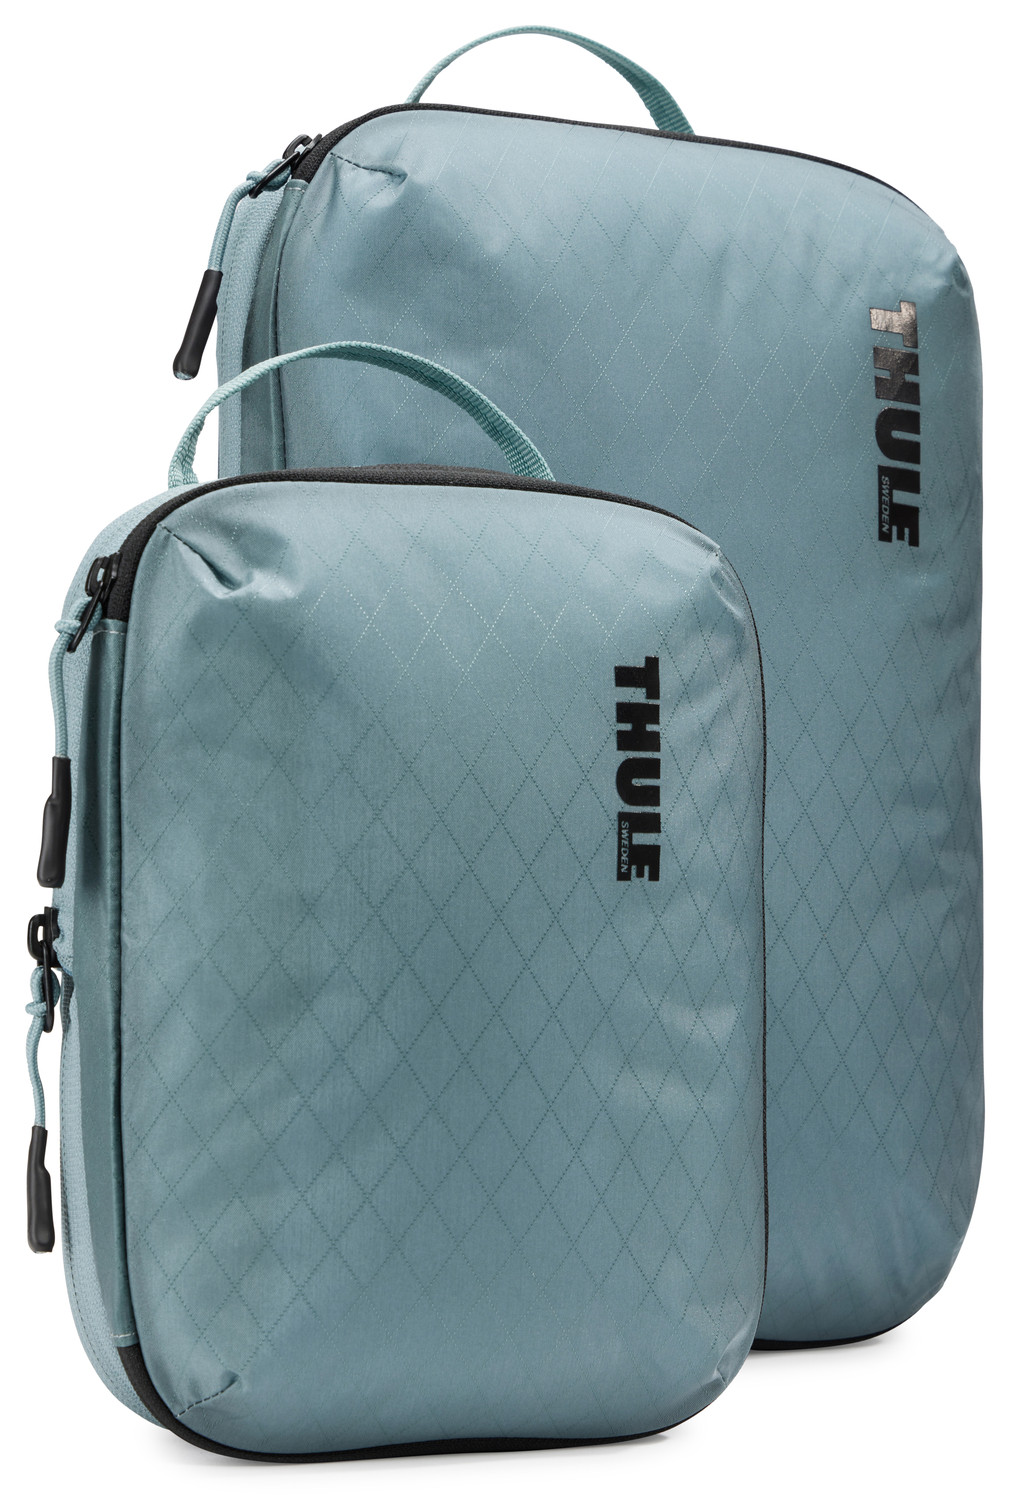 Thule | Compression Cube Set | Packing Cube | Pond Gray